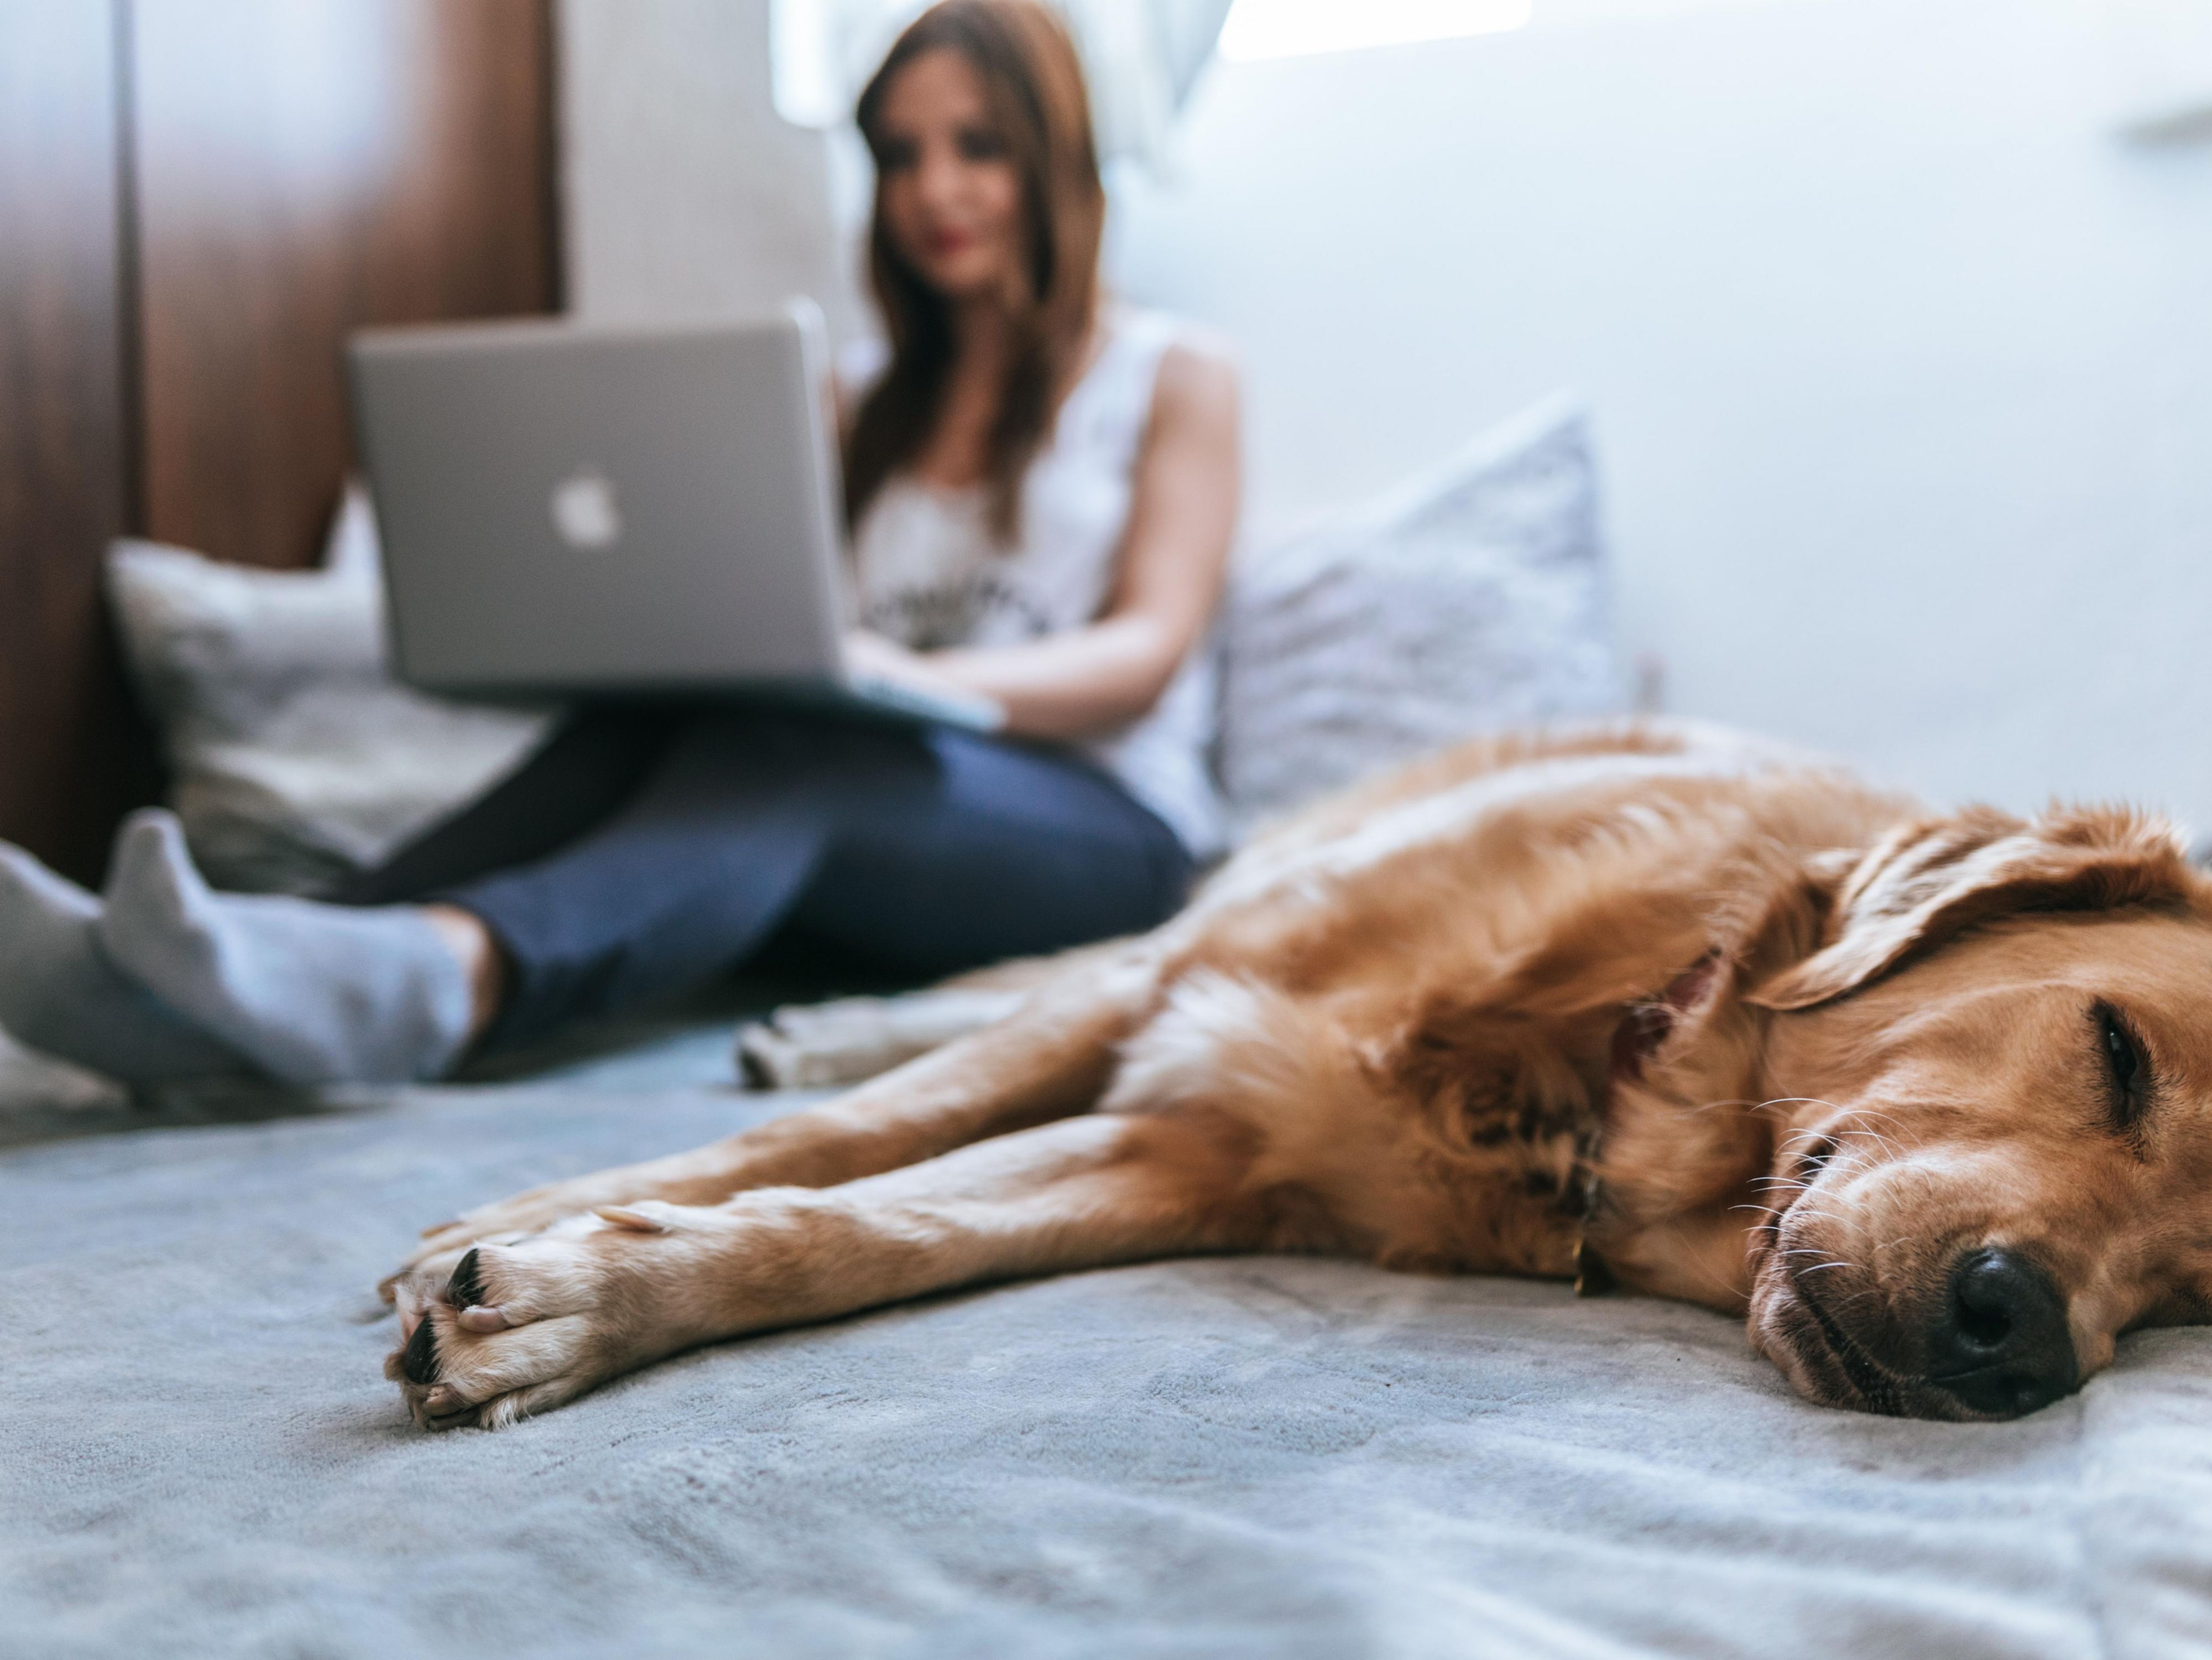 We're delighted to offer pet-friendly stays for you and your beloved four-legged best friends. Bring your entire family and inquire about our new pricing options. Experience our fantastic service with your fur babies at the Crowne Plaza Moncton Downtown!